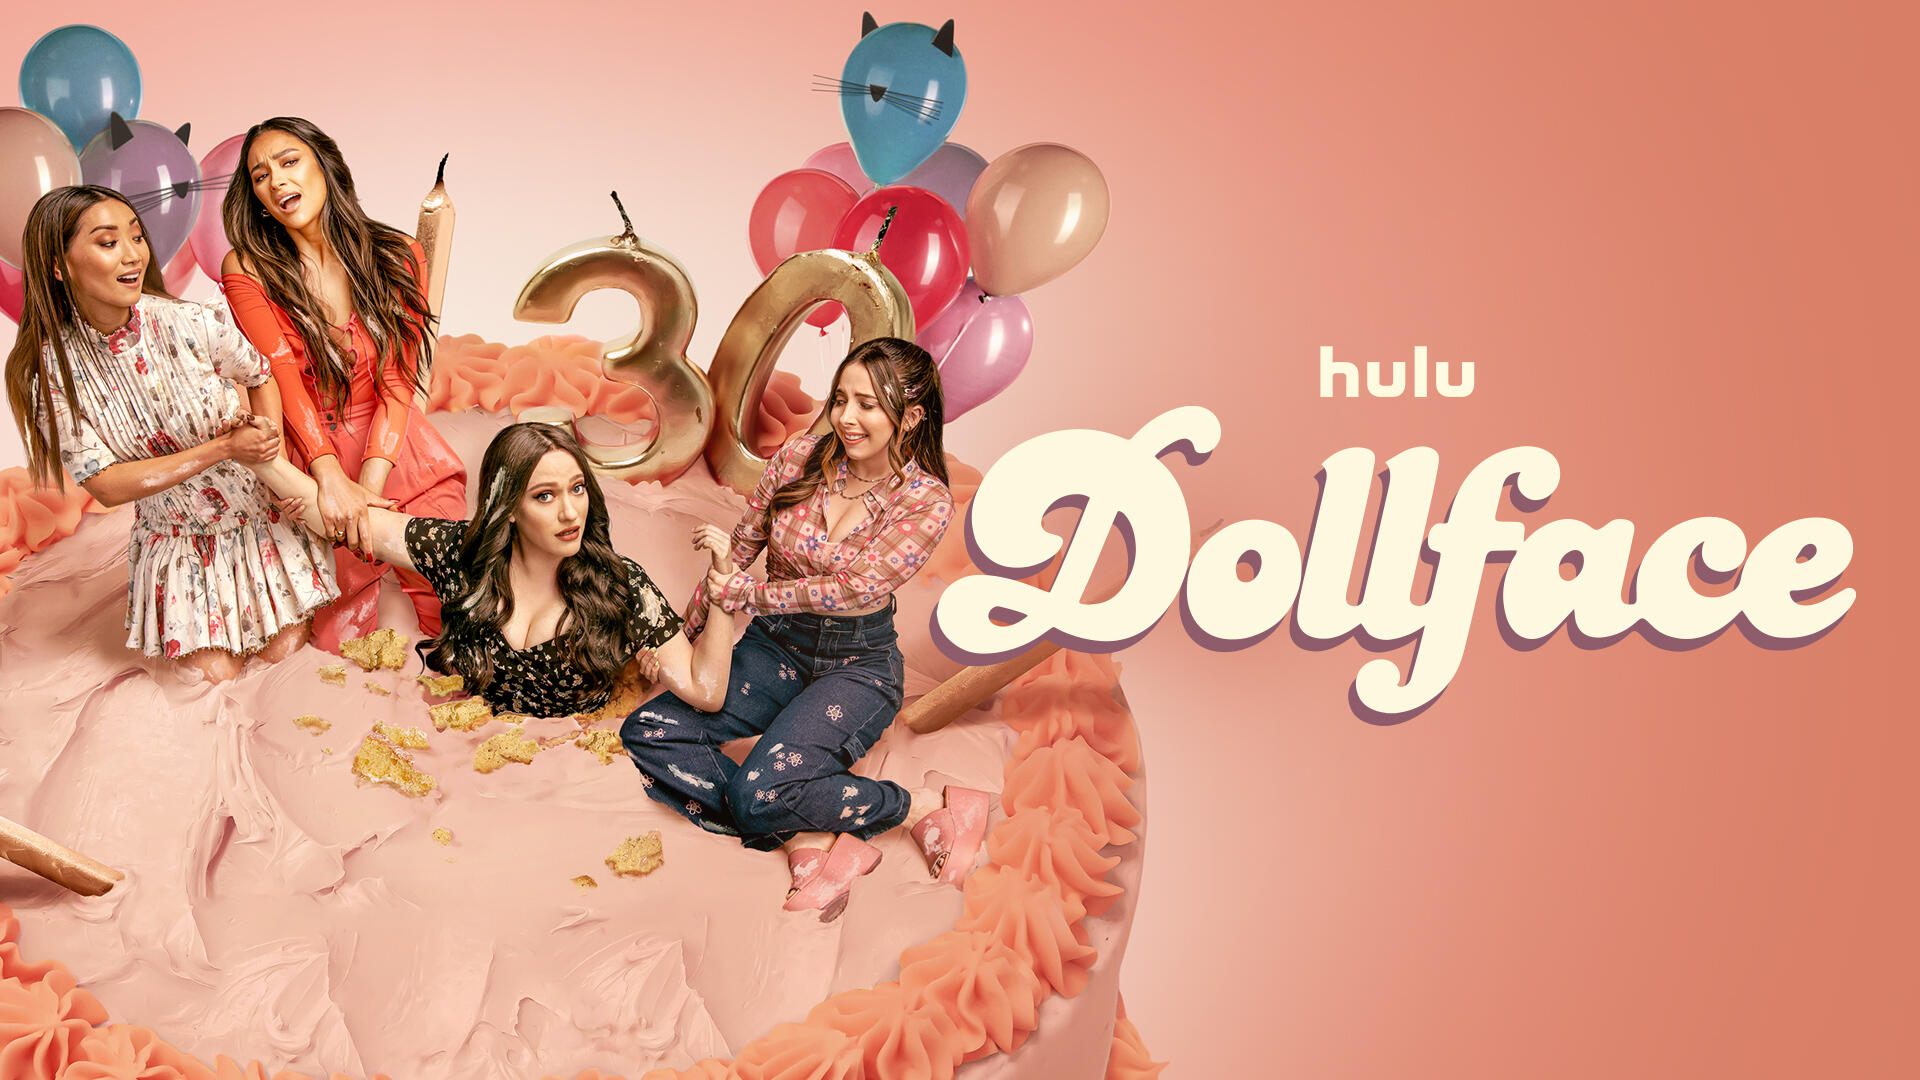 Disney+ International Keeps Adding More Hulu Content, Could U.S. be Next?